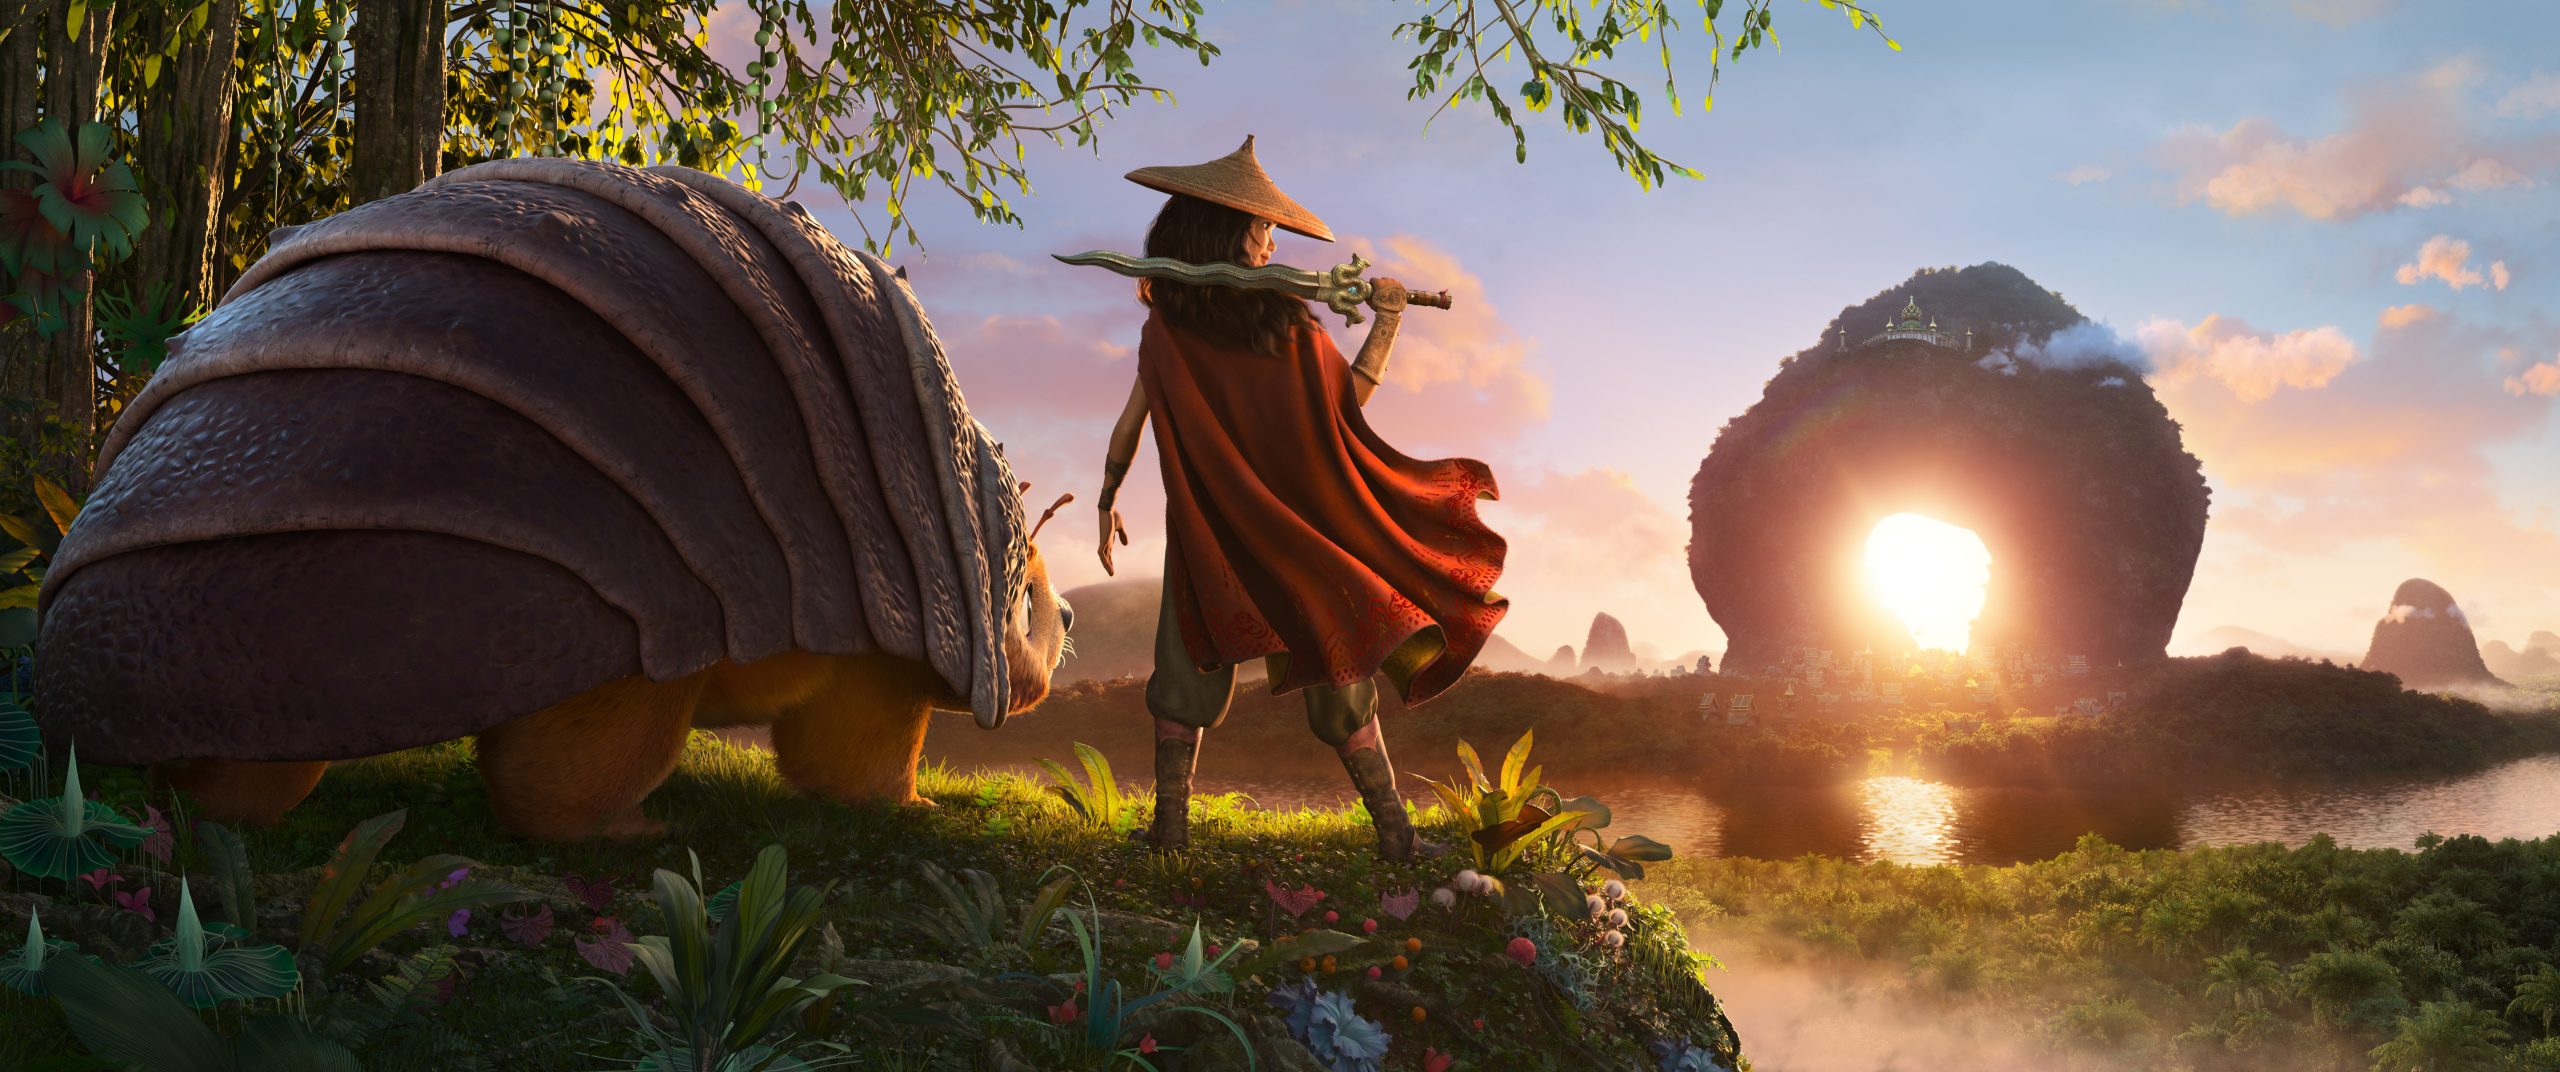 DISNEY’S “RAYA AND THE LAST DRAGON” FIRST-LOOK IMAGE